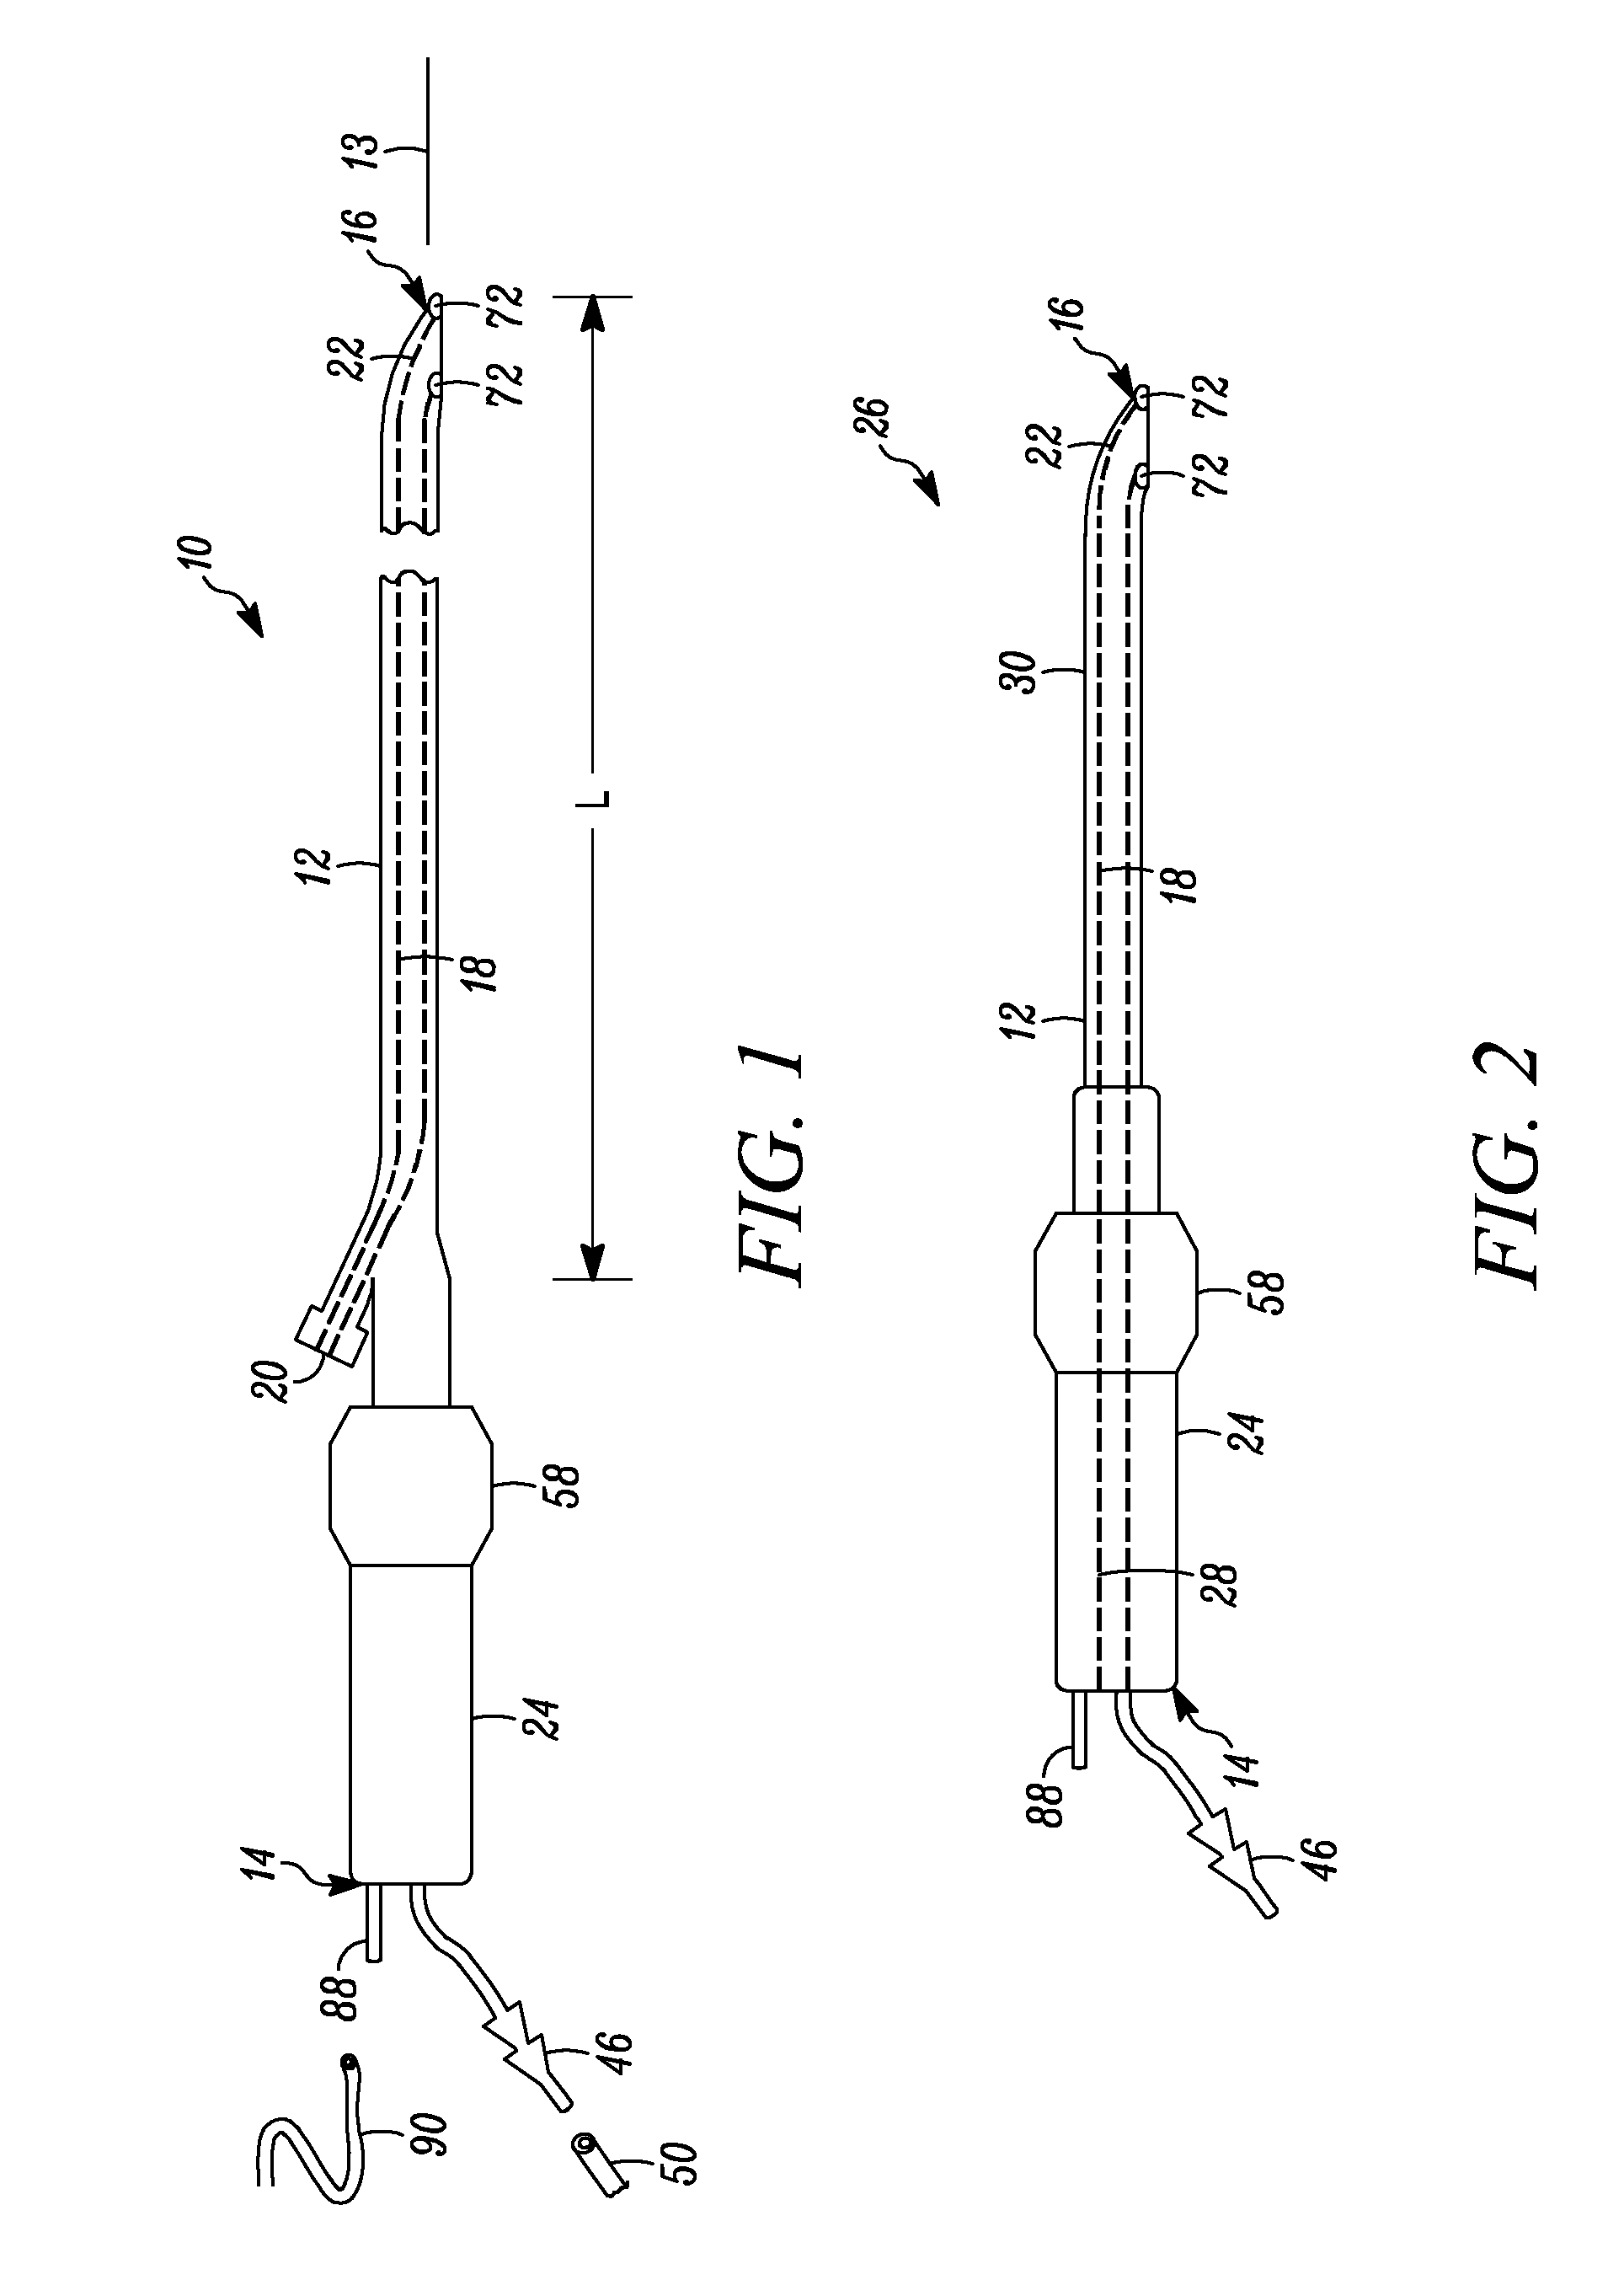 Methods and apparatus for lead placement on a surface of the heart